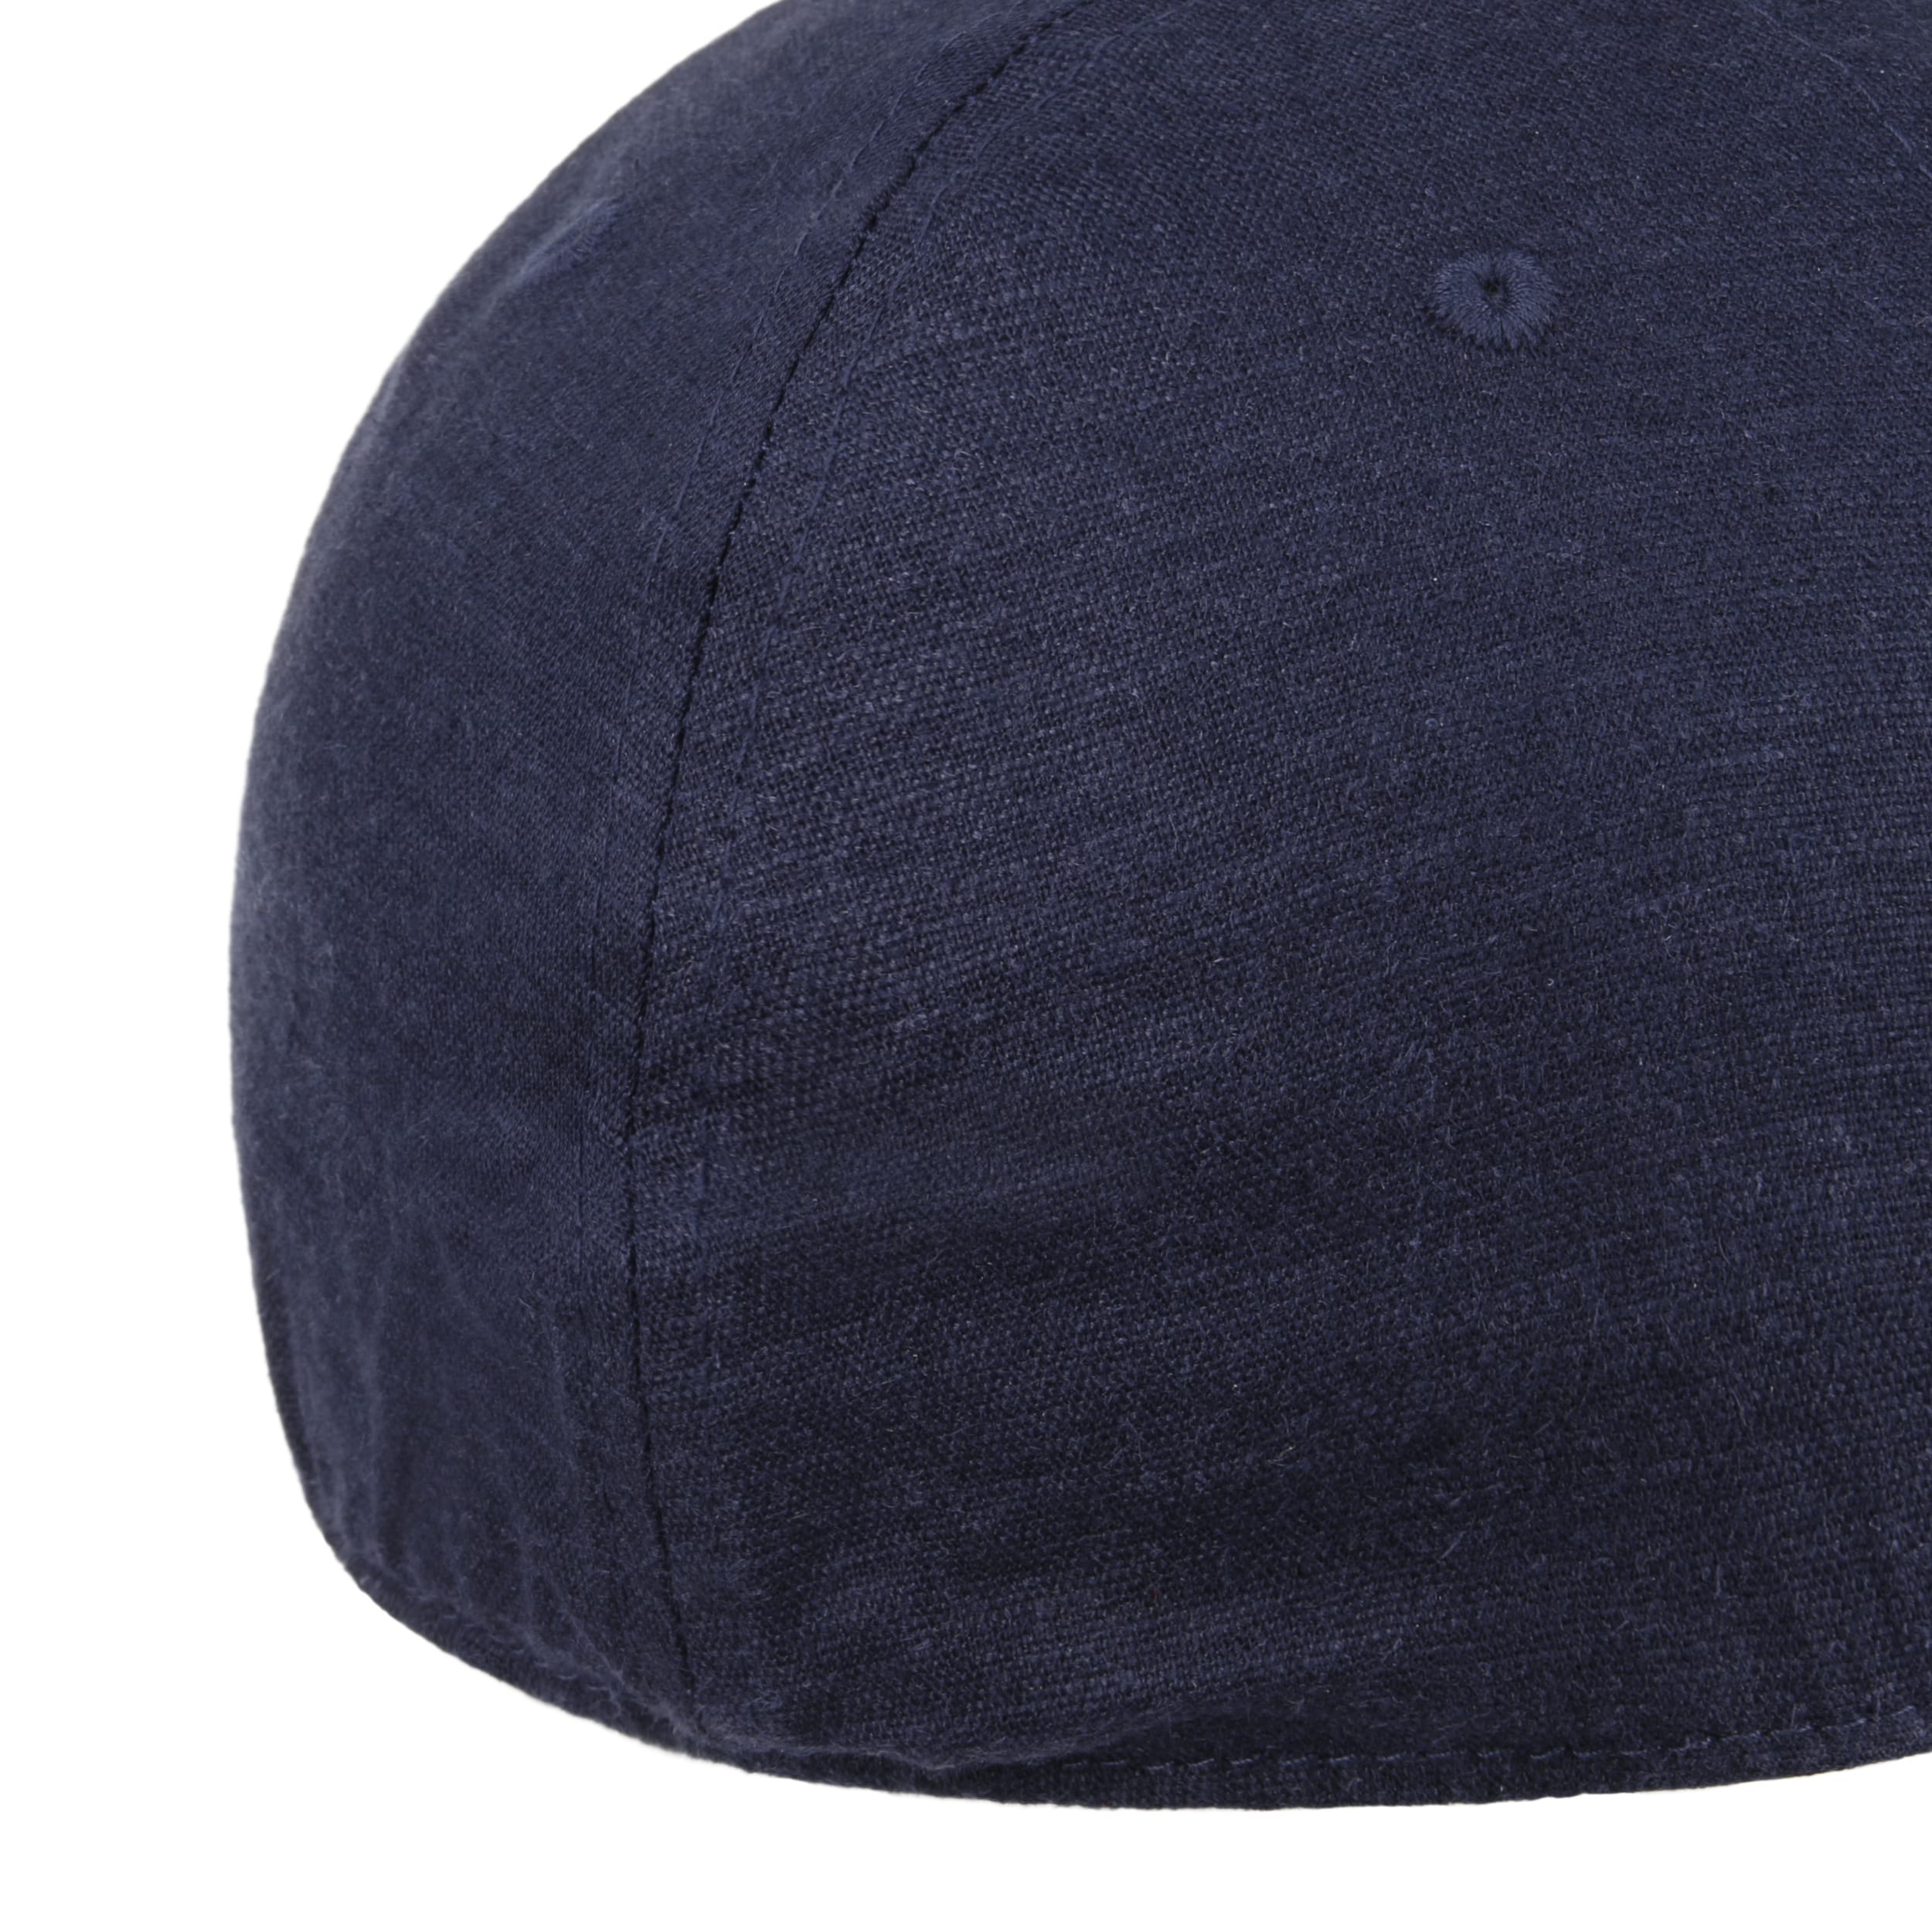 Sao Paolo Linen Cap by Chillouts - € 26,95